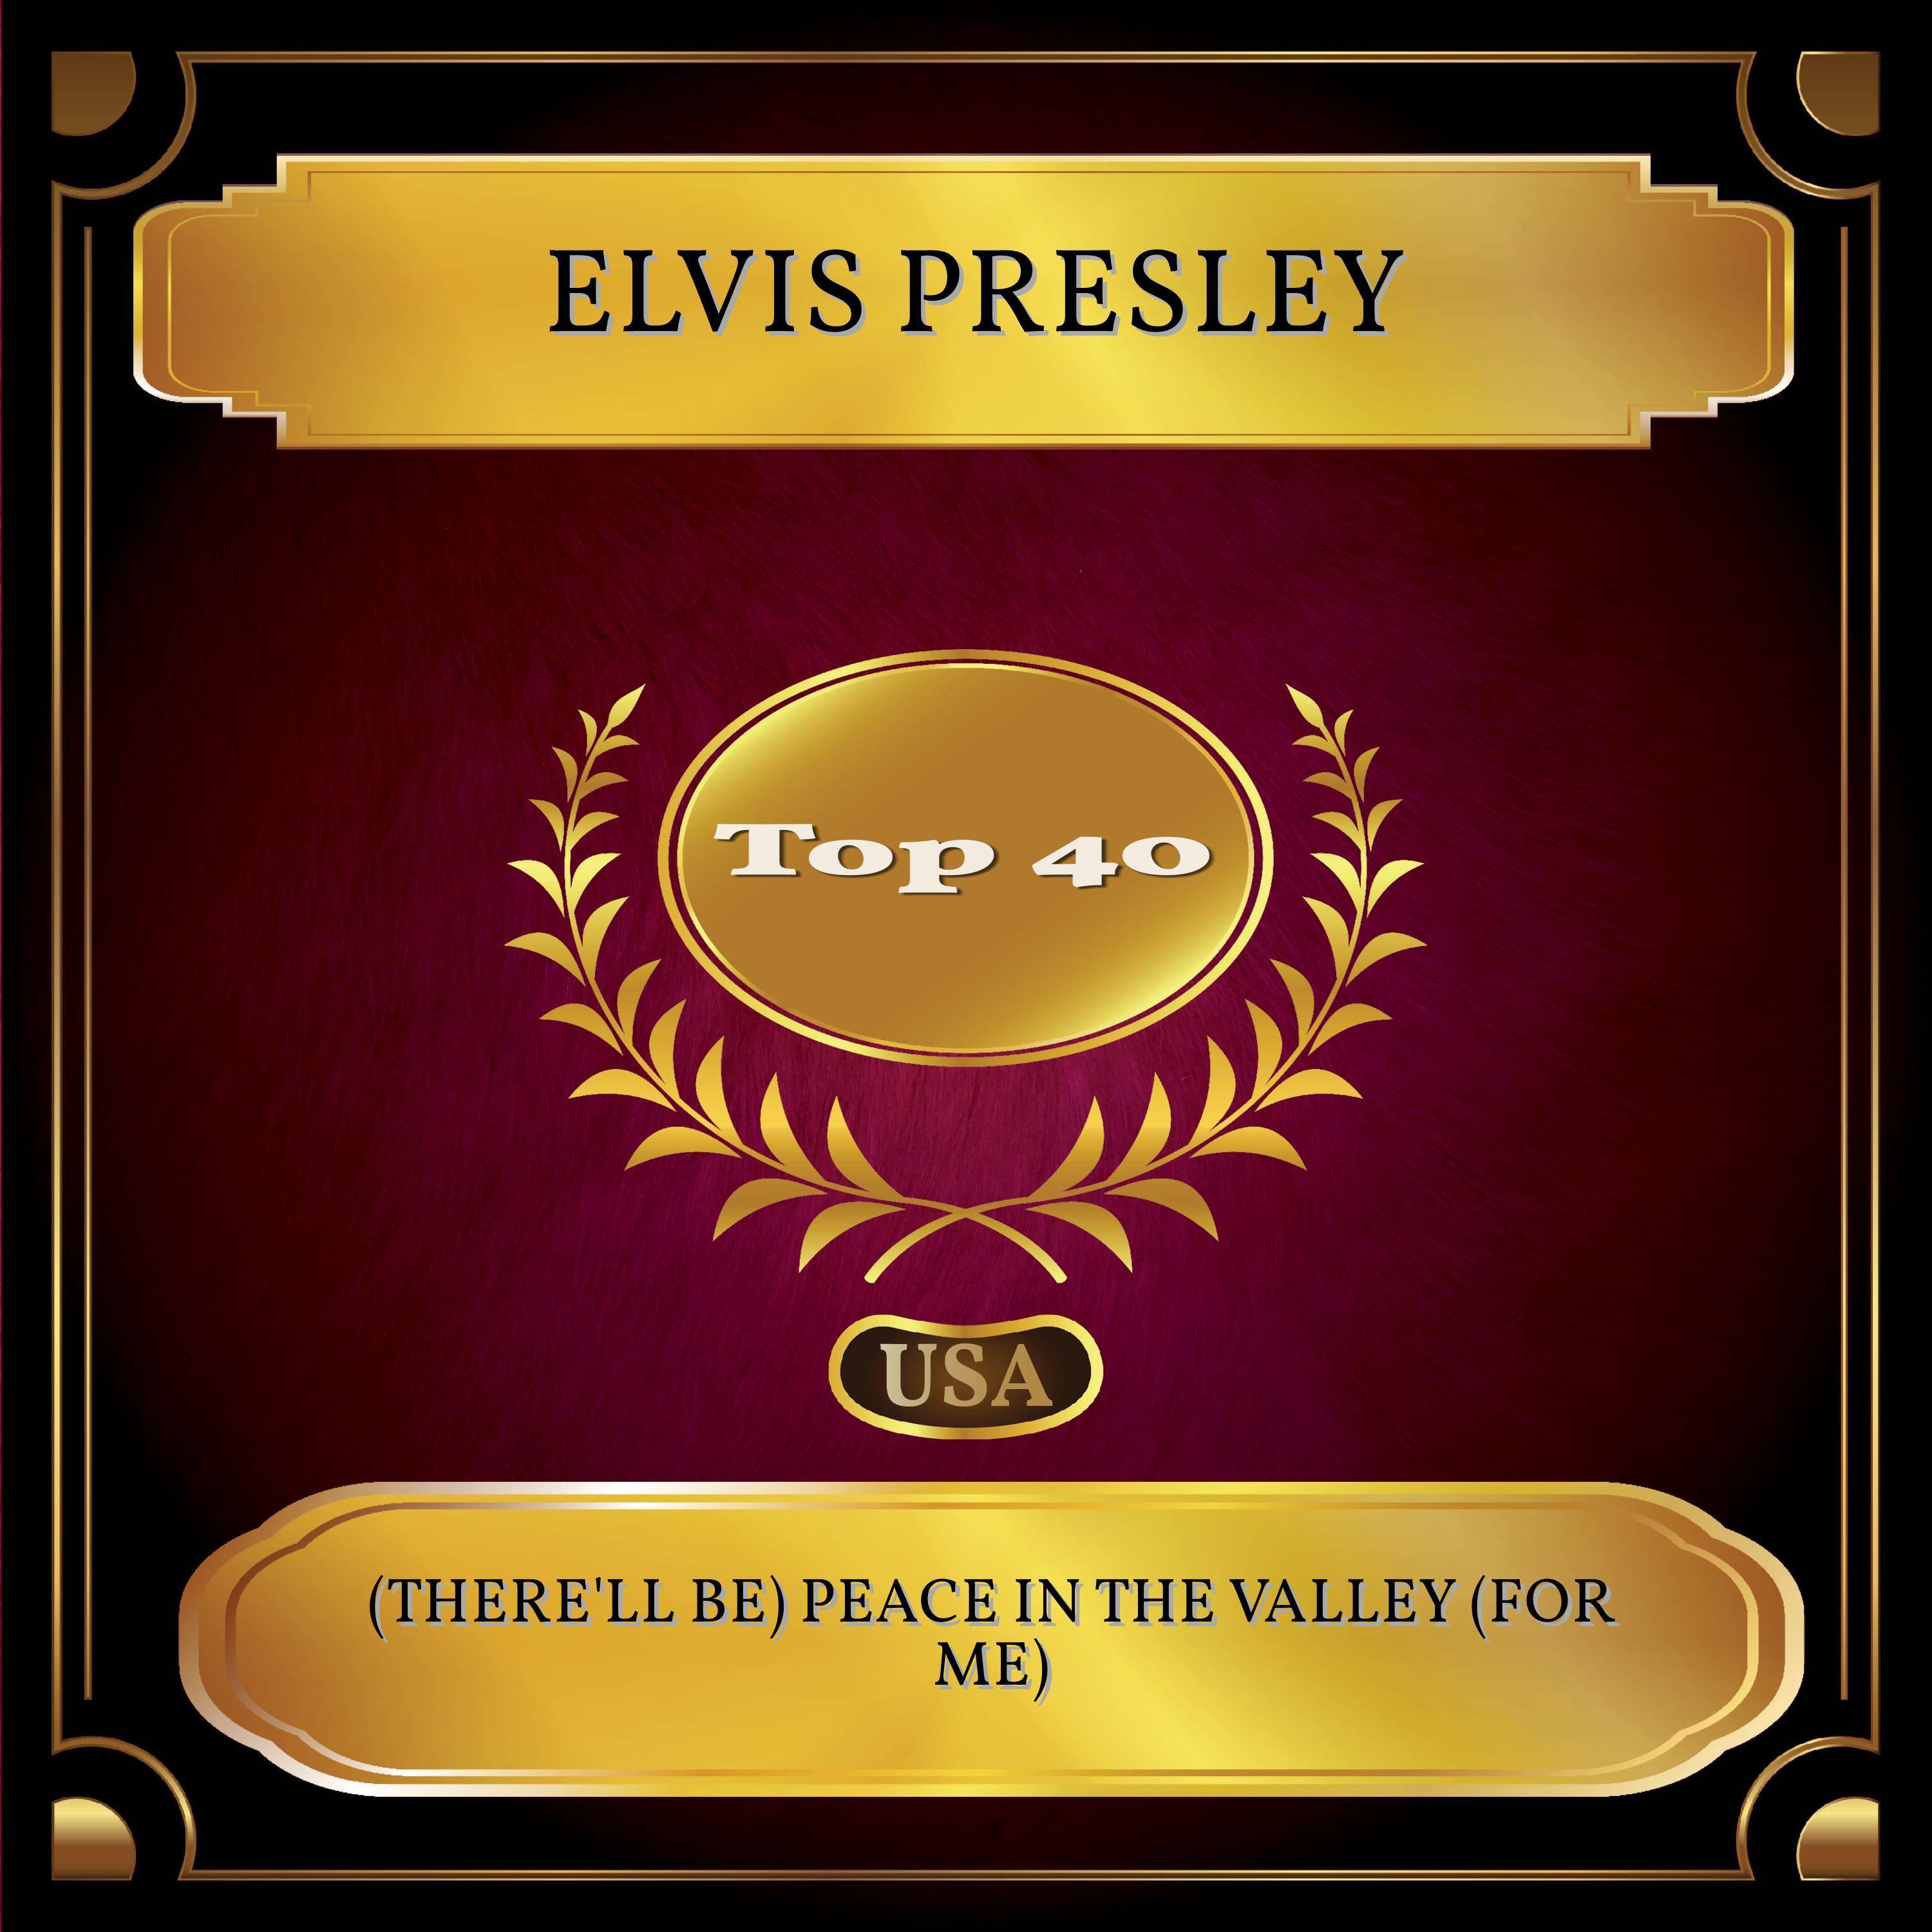 (There'll Be) Peace In The Valley (For Me) (Billboard Hot 100 - No. 25)专辑